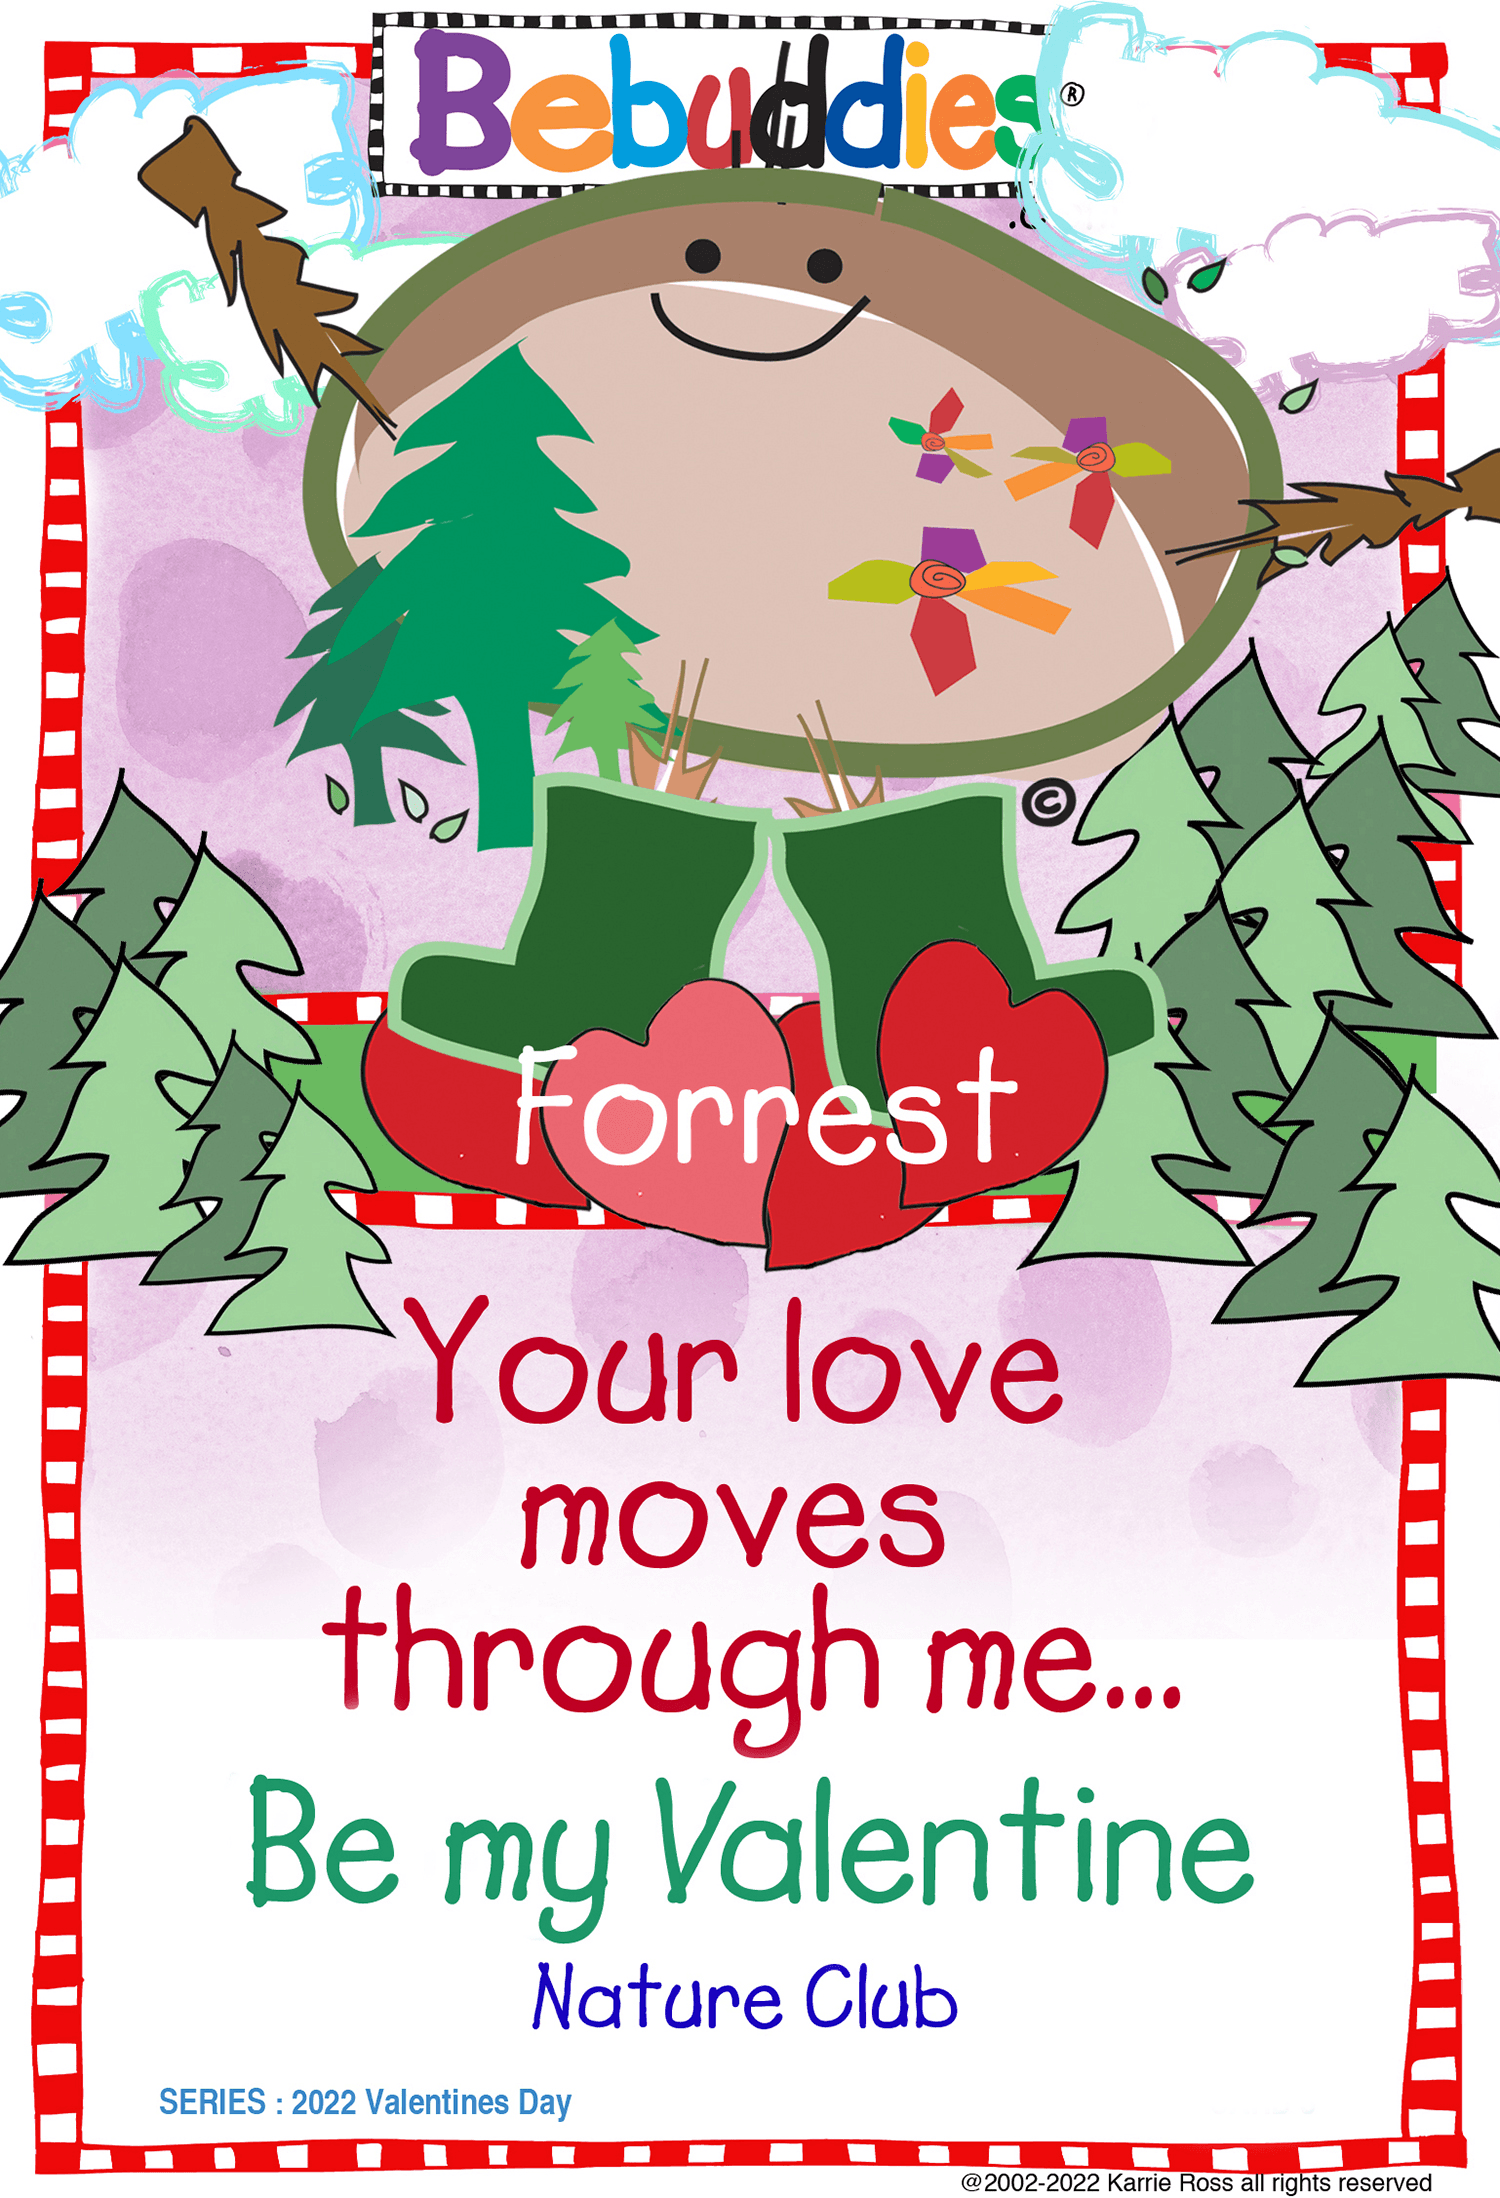 Bebuddies Holidays: Valentines Day by Karrie Ross : Forrest